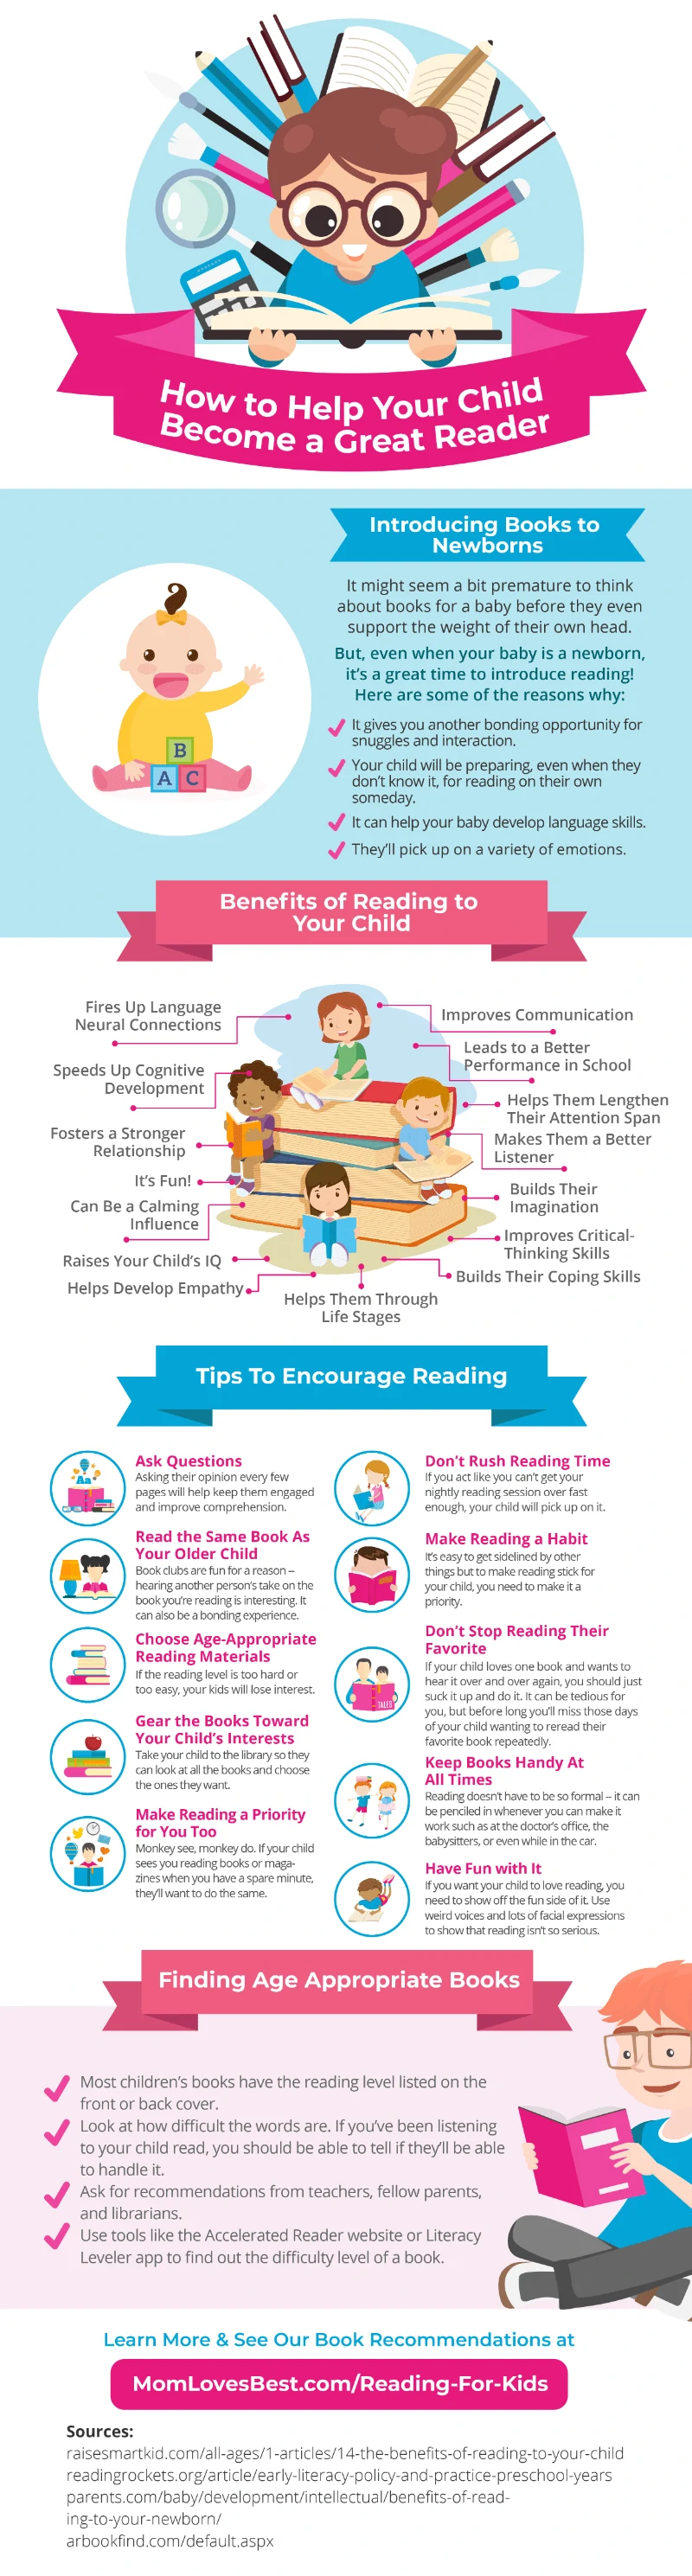 The benefits of reading to kids